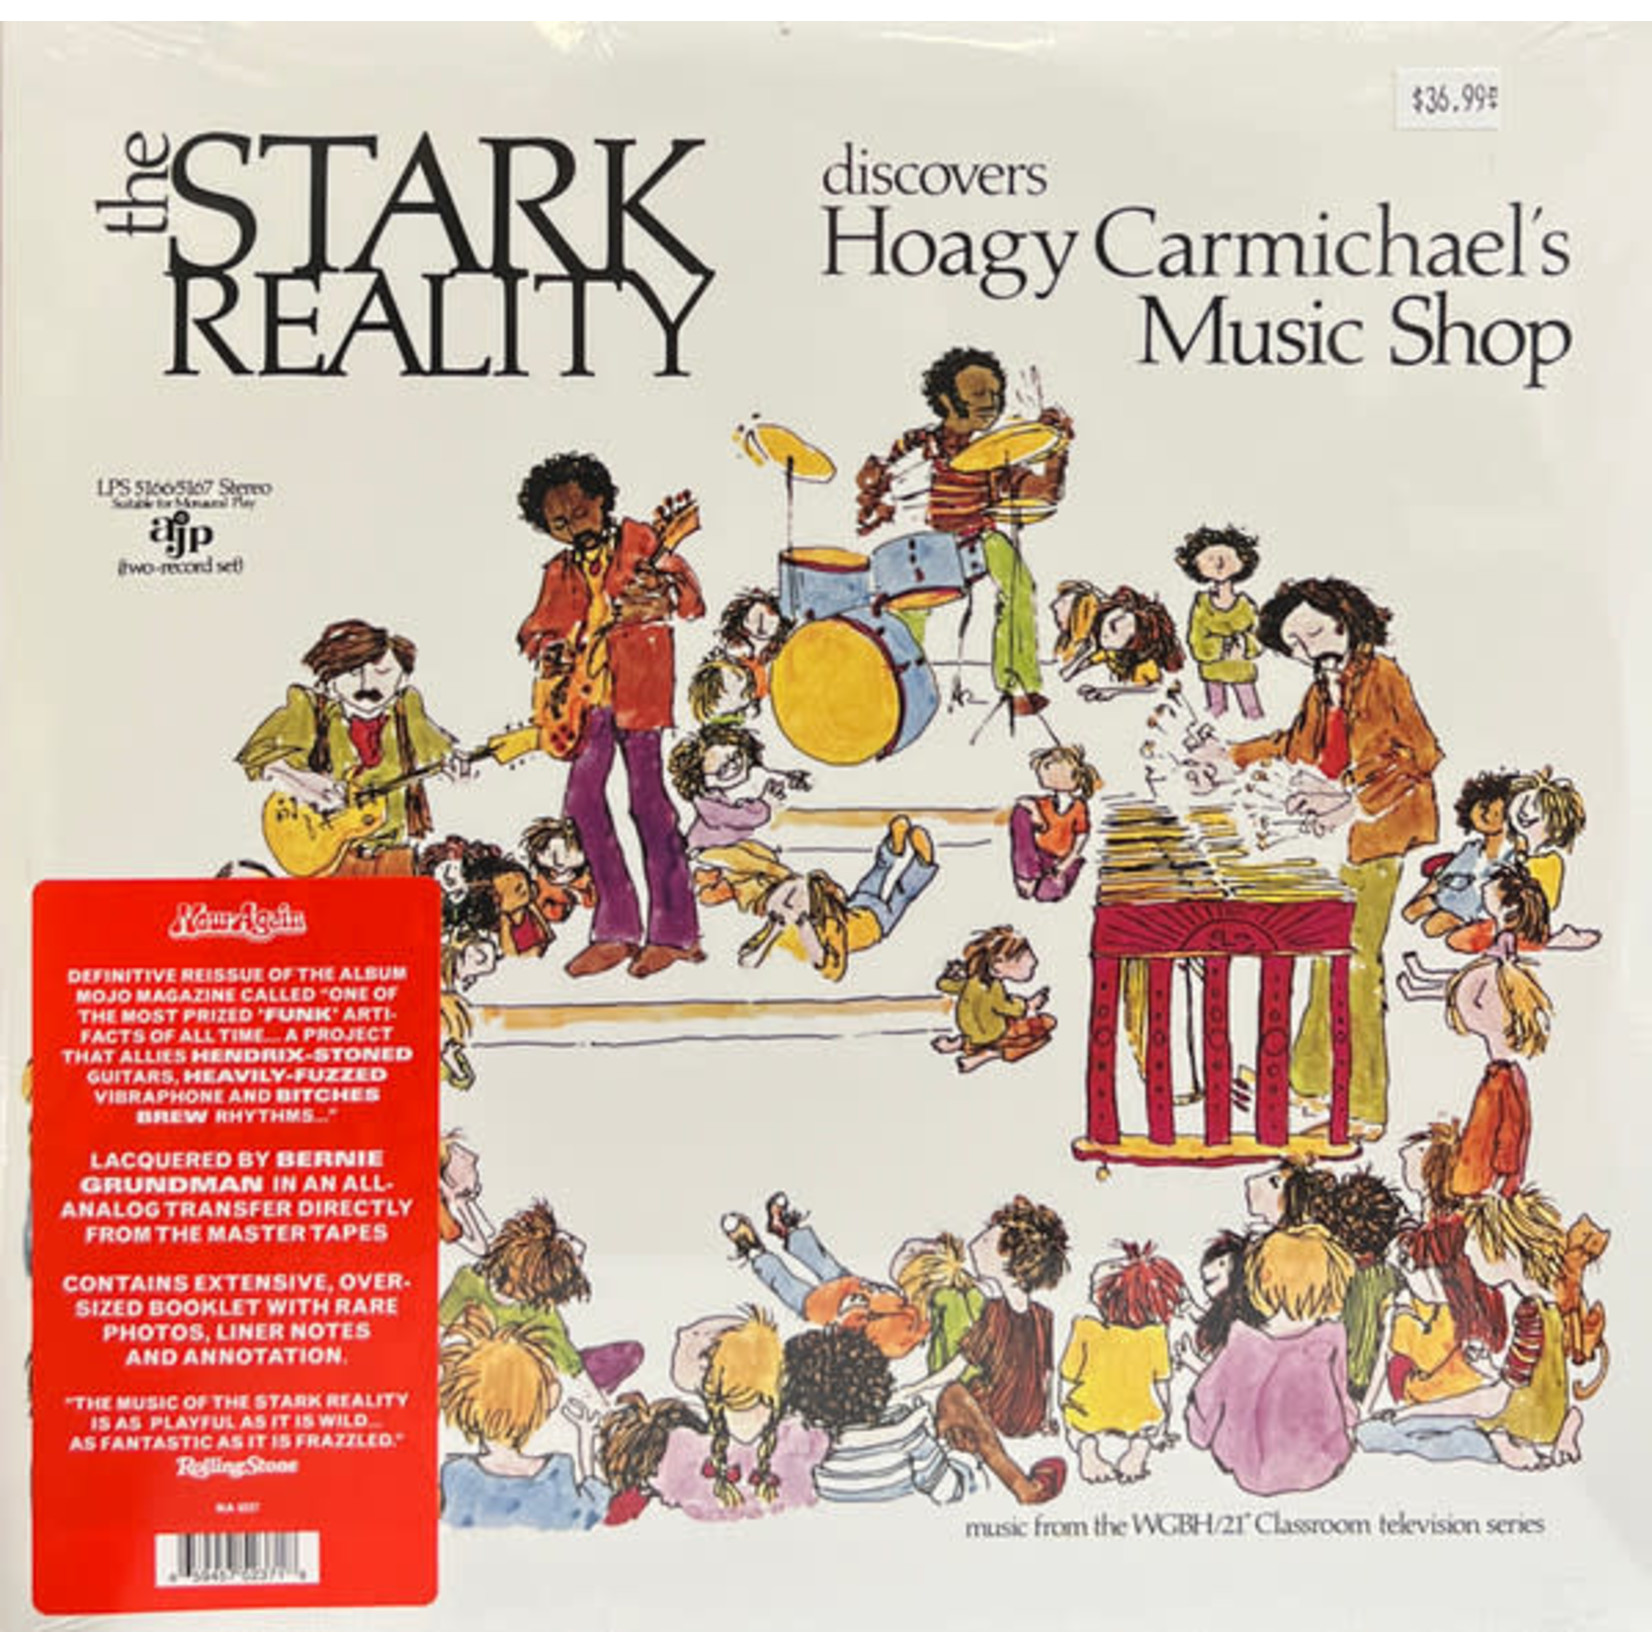 [New] [Out of Print] Stark Reality: 2022 Black Friday - Discovers Hoagy Carmichael's Music Shop (2LP) [NOW-AGAIN]